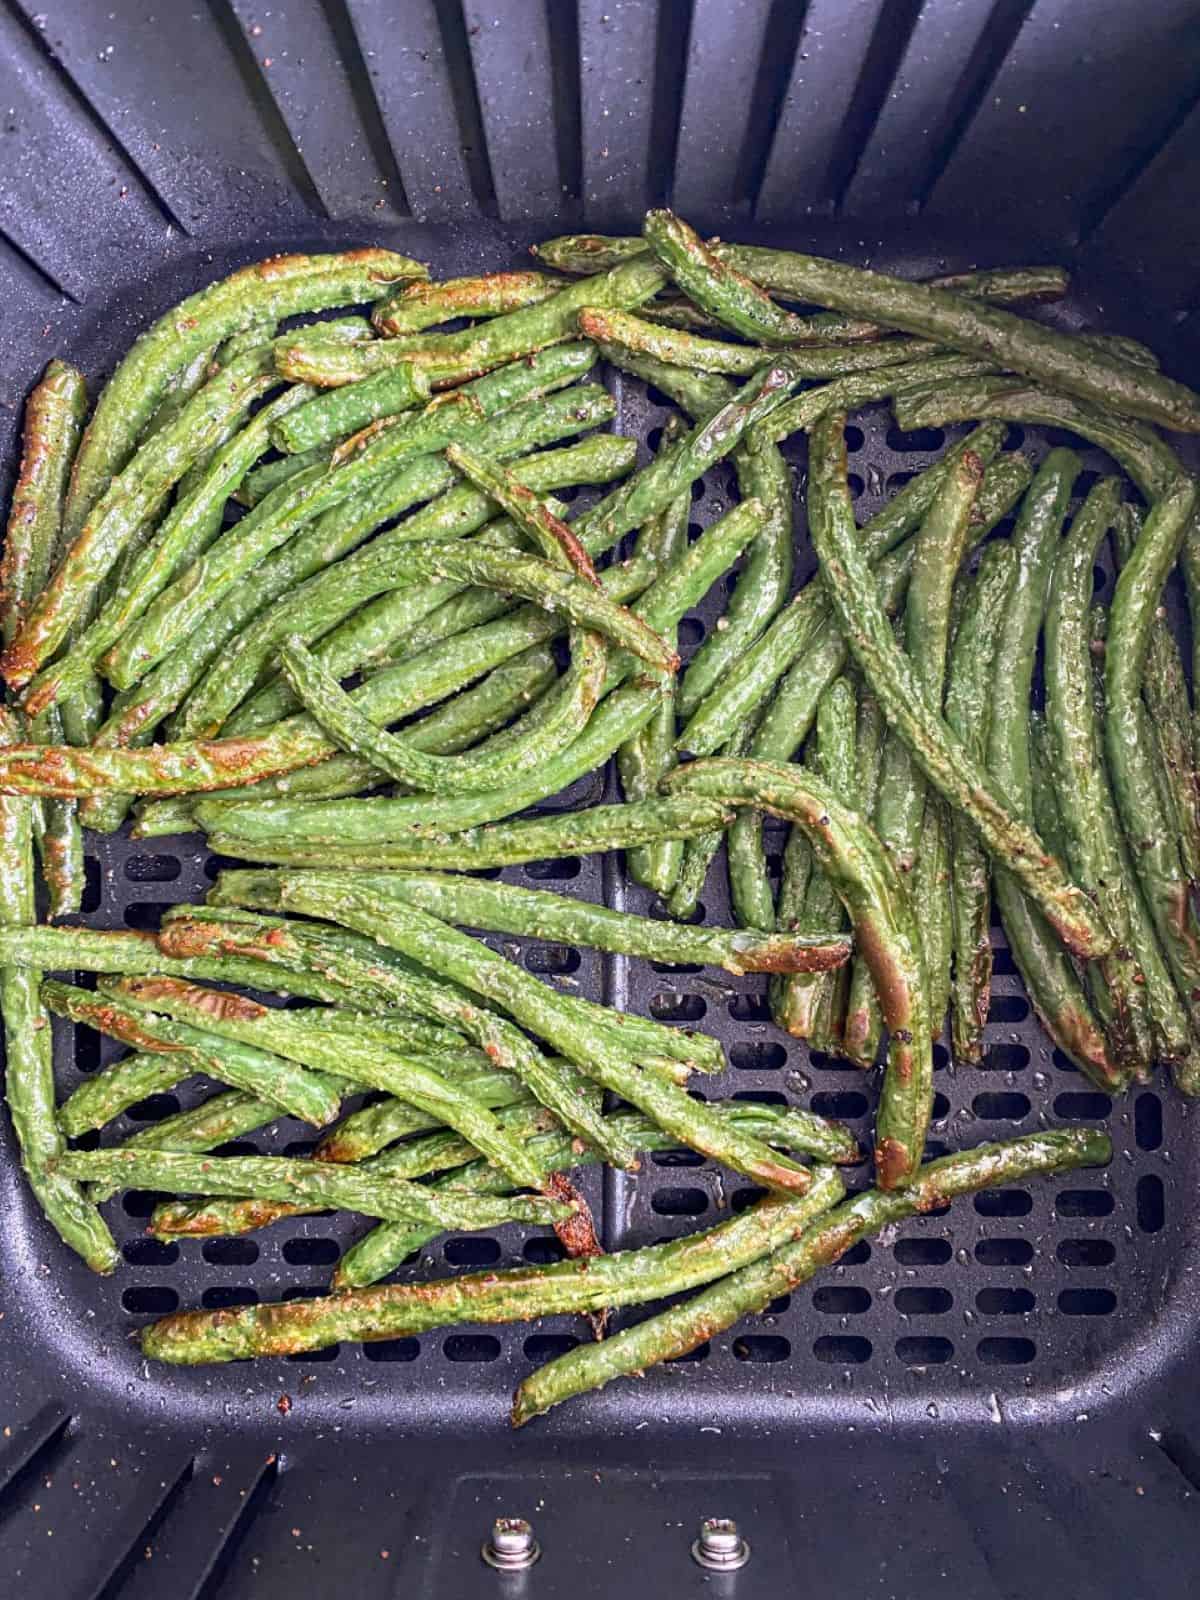 Cooked green beans in air fryer basket.